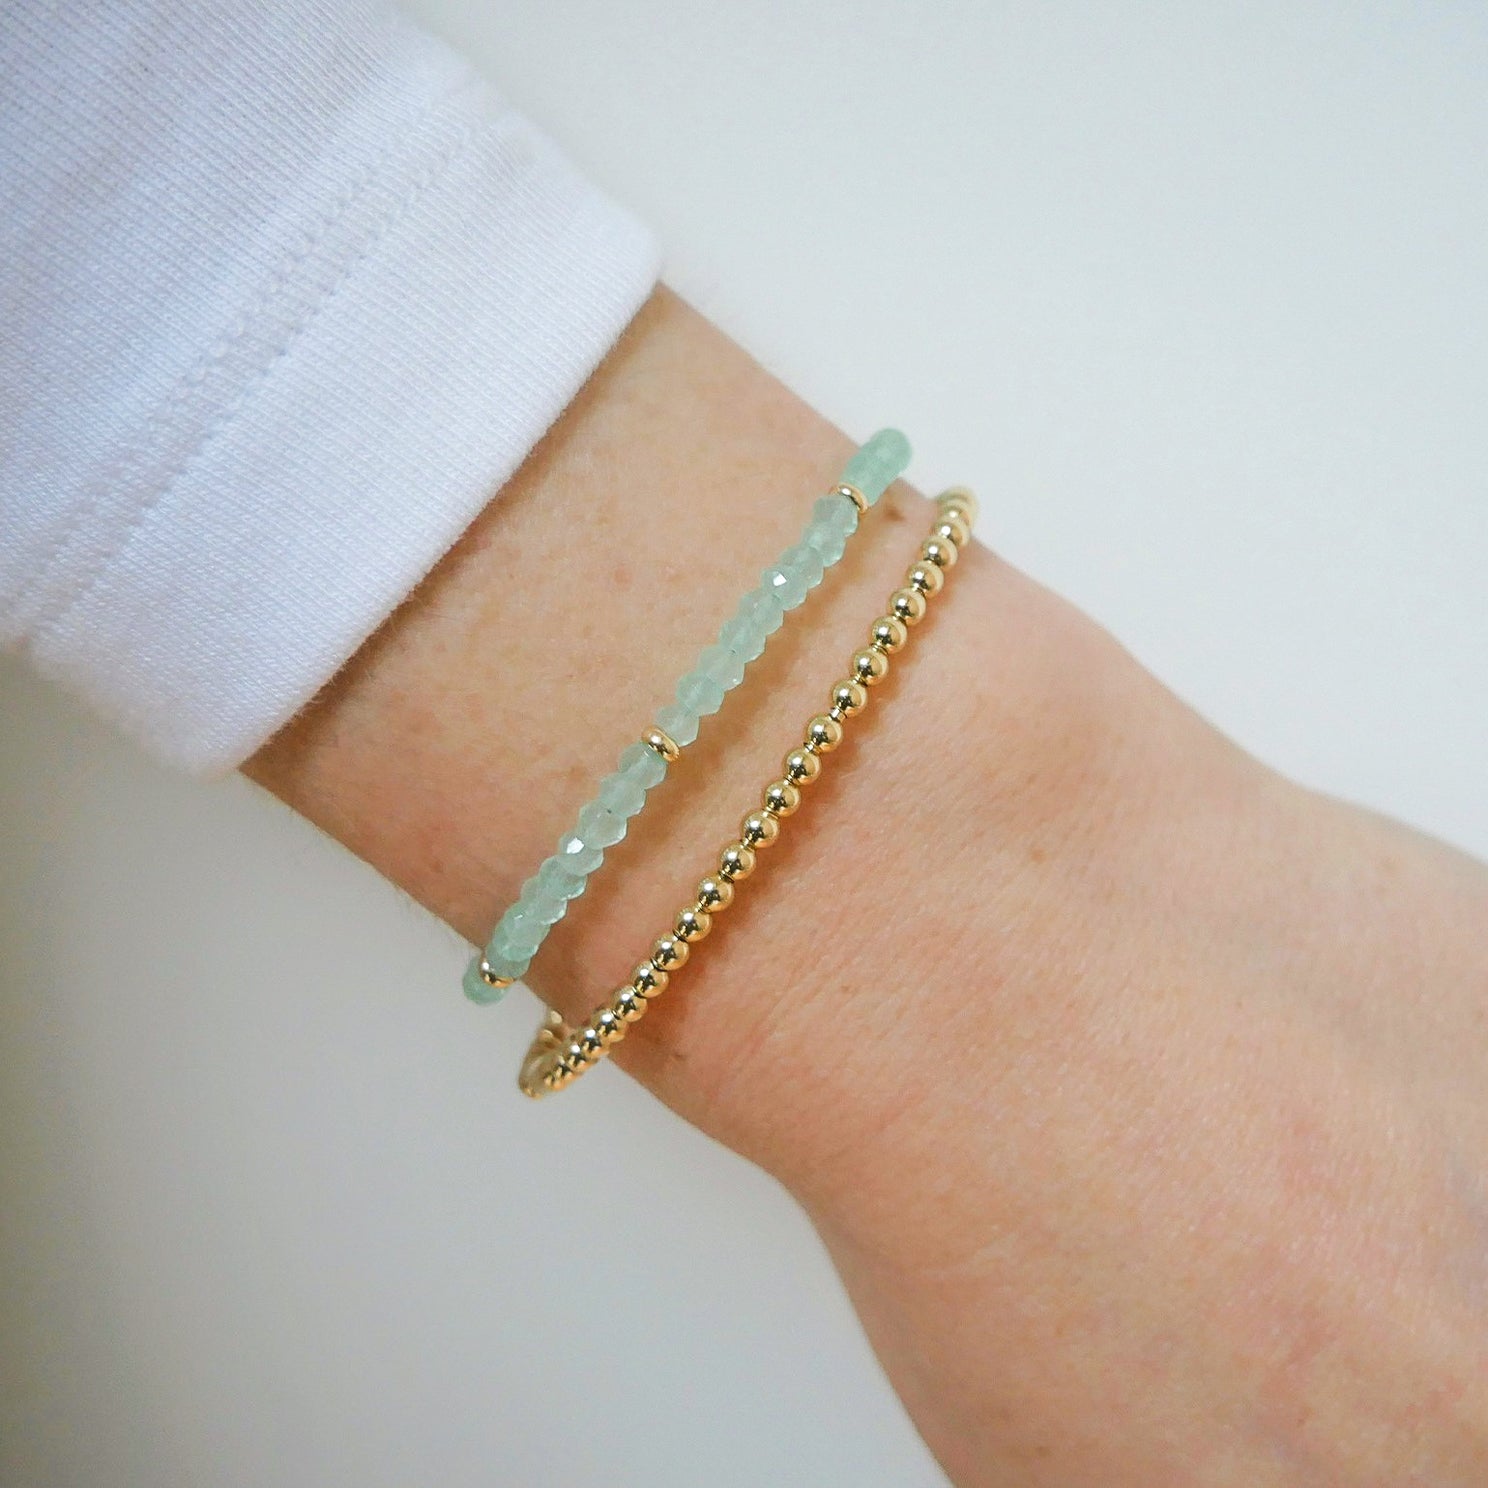 Birthstone Bead Bracelet In Chalcedony styled on wrist with gold ball stretch bracelet on model wearing white sleeve